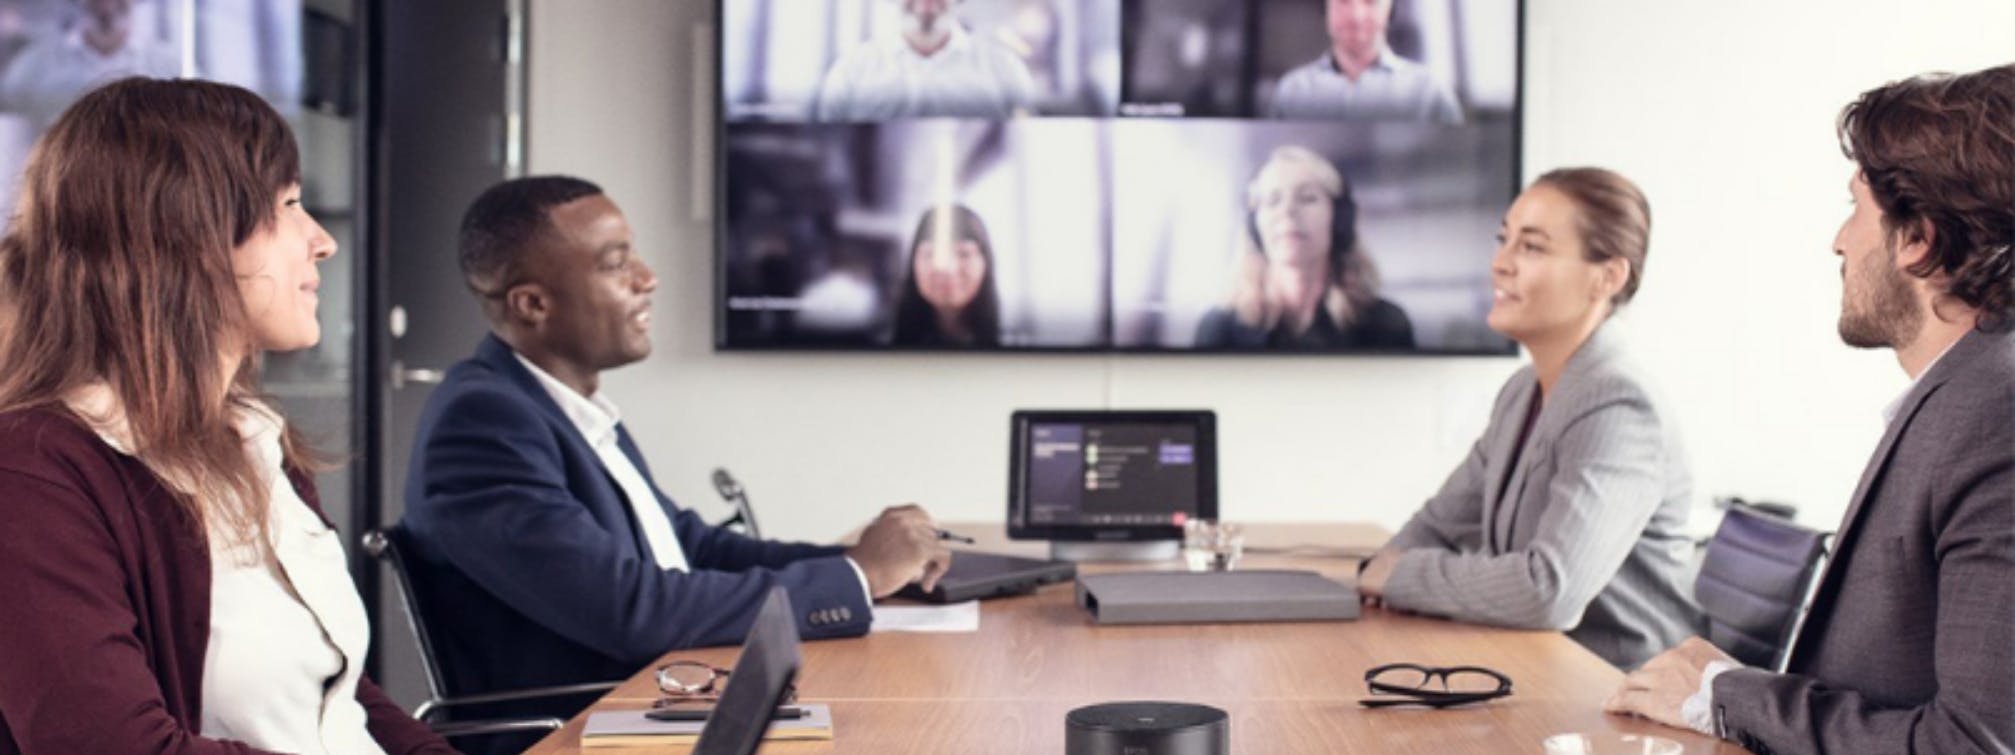 People Video Conferencing in Office